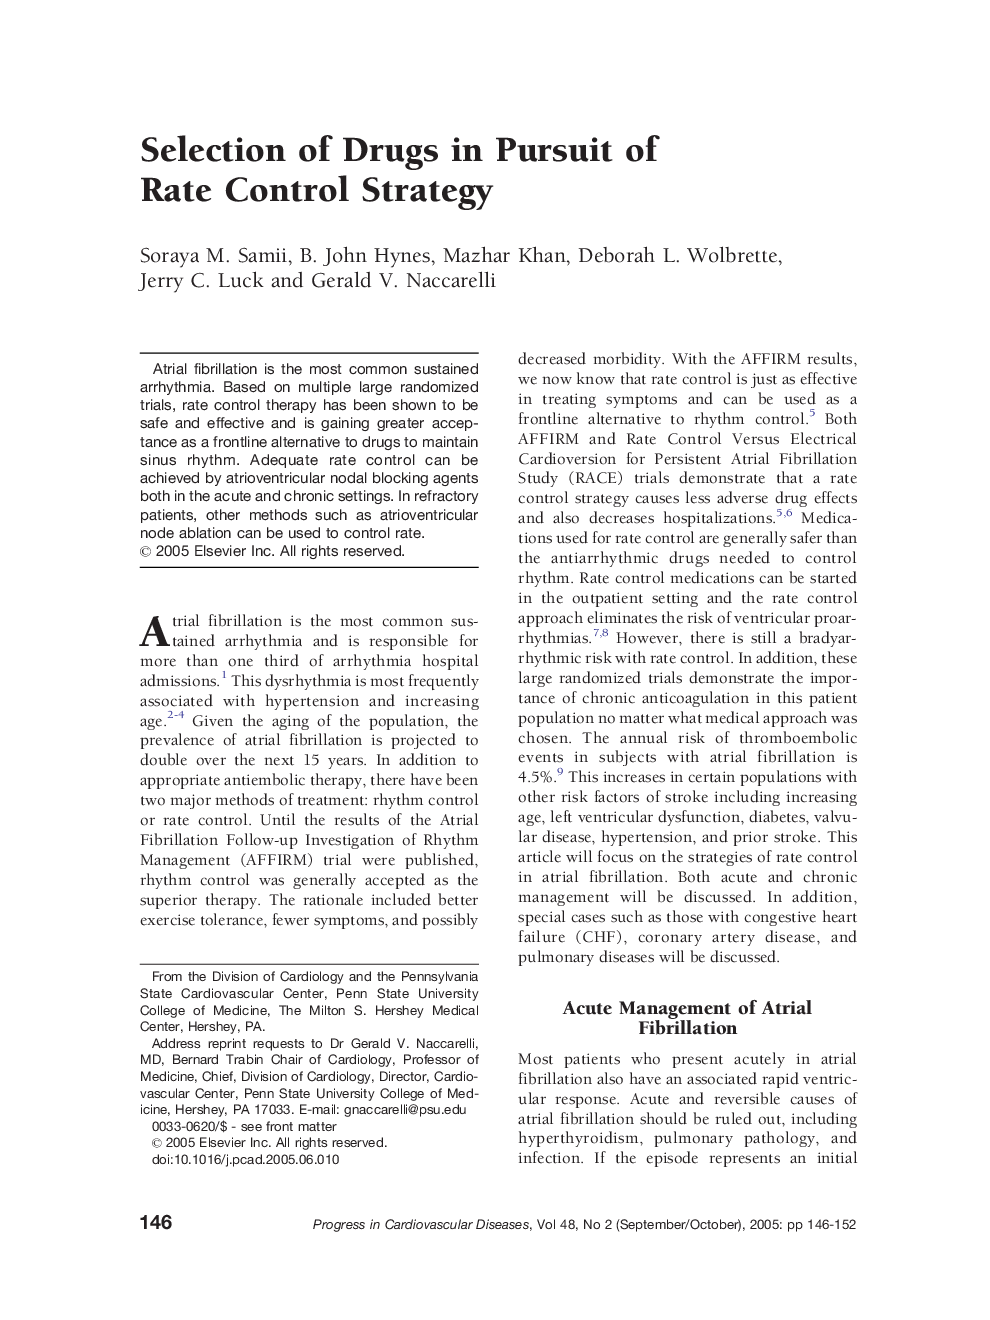 Selection of Drugs in Pursuit of Rate Control Strategy